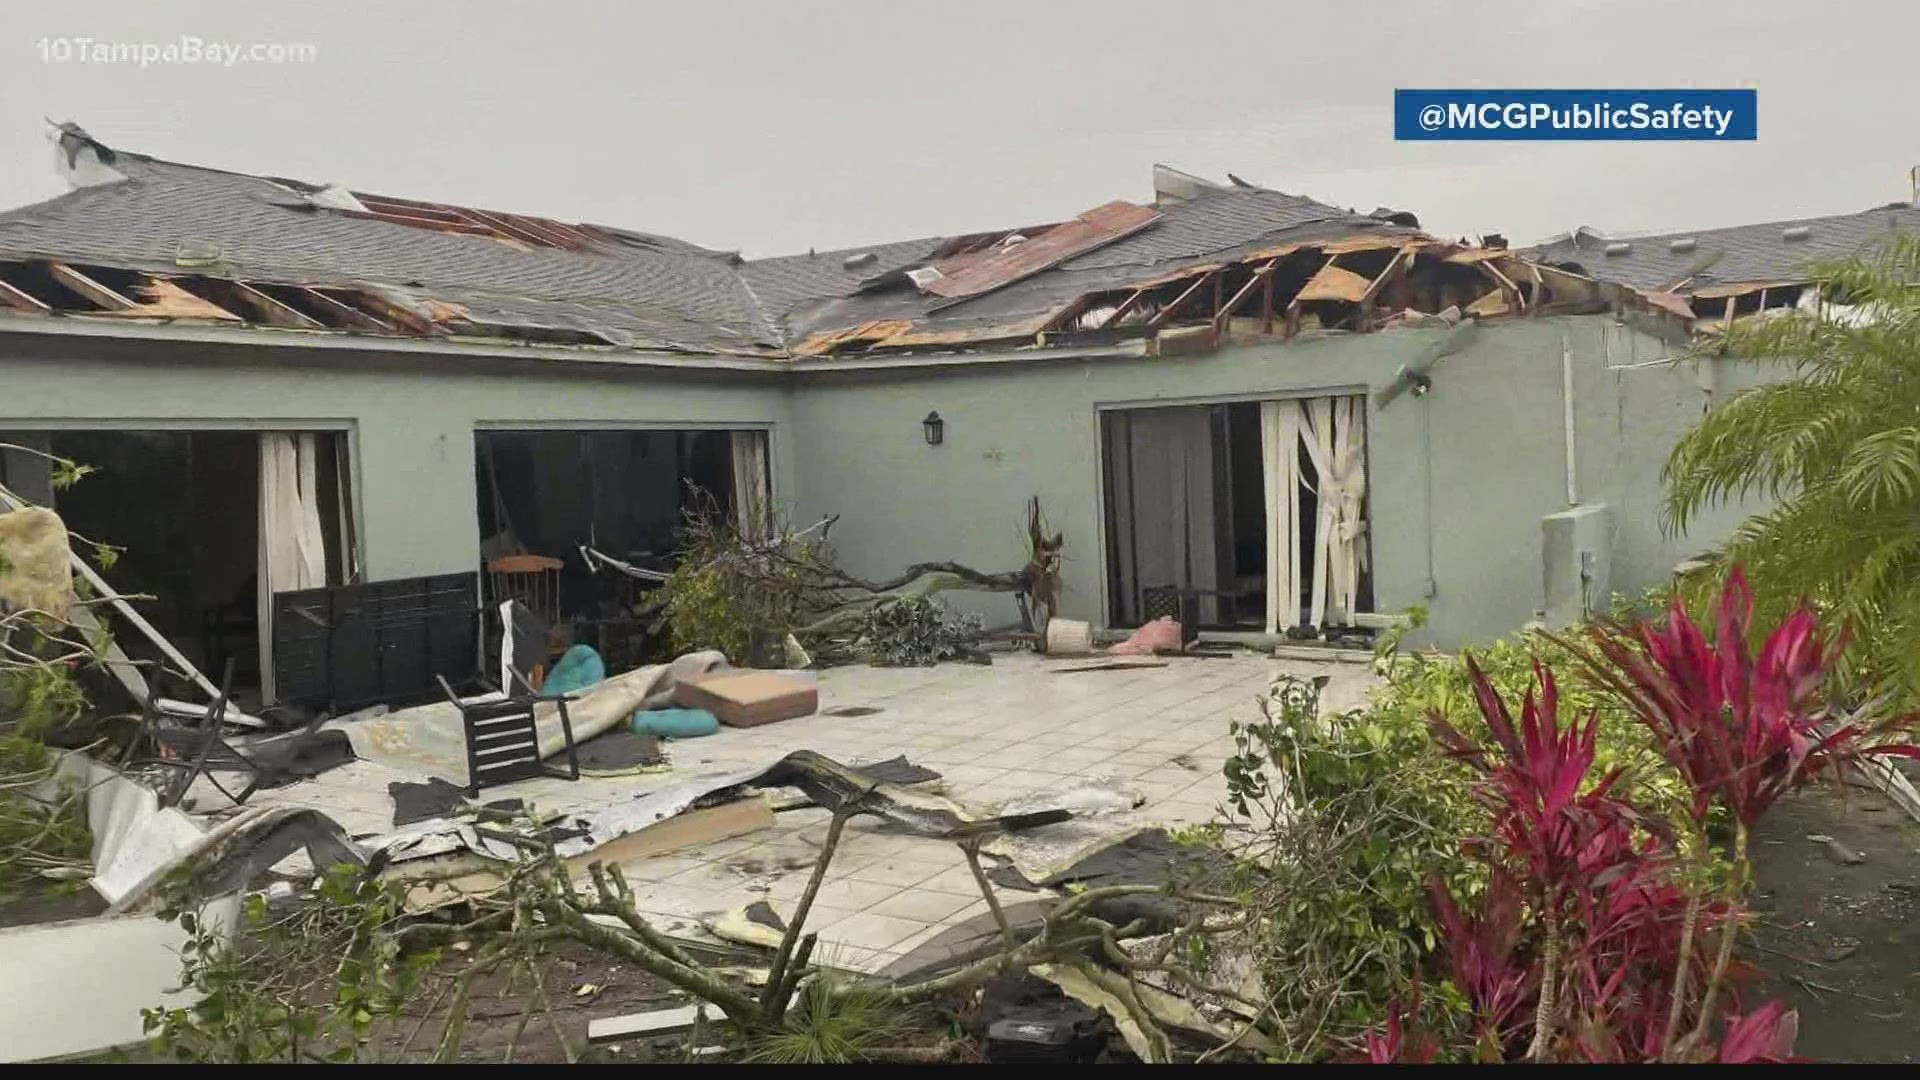 The National Weather Service says an EF-1 touched down Saturday in Bradenton and an EF-0 touched down Sunday near Winter Haven.